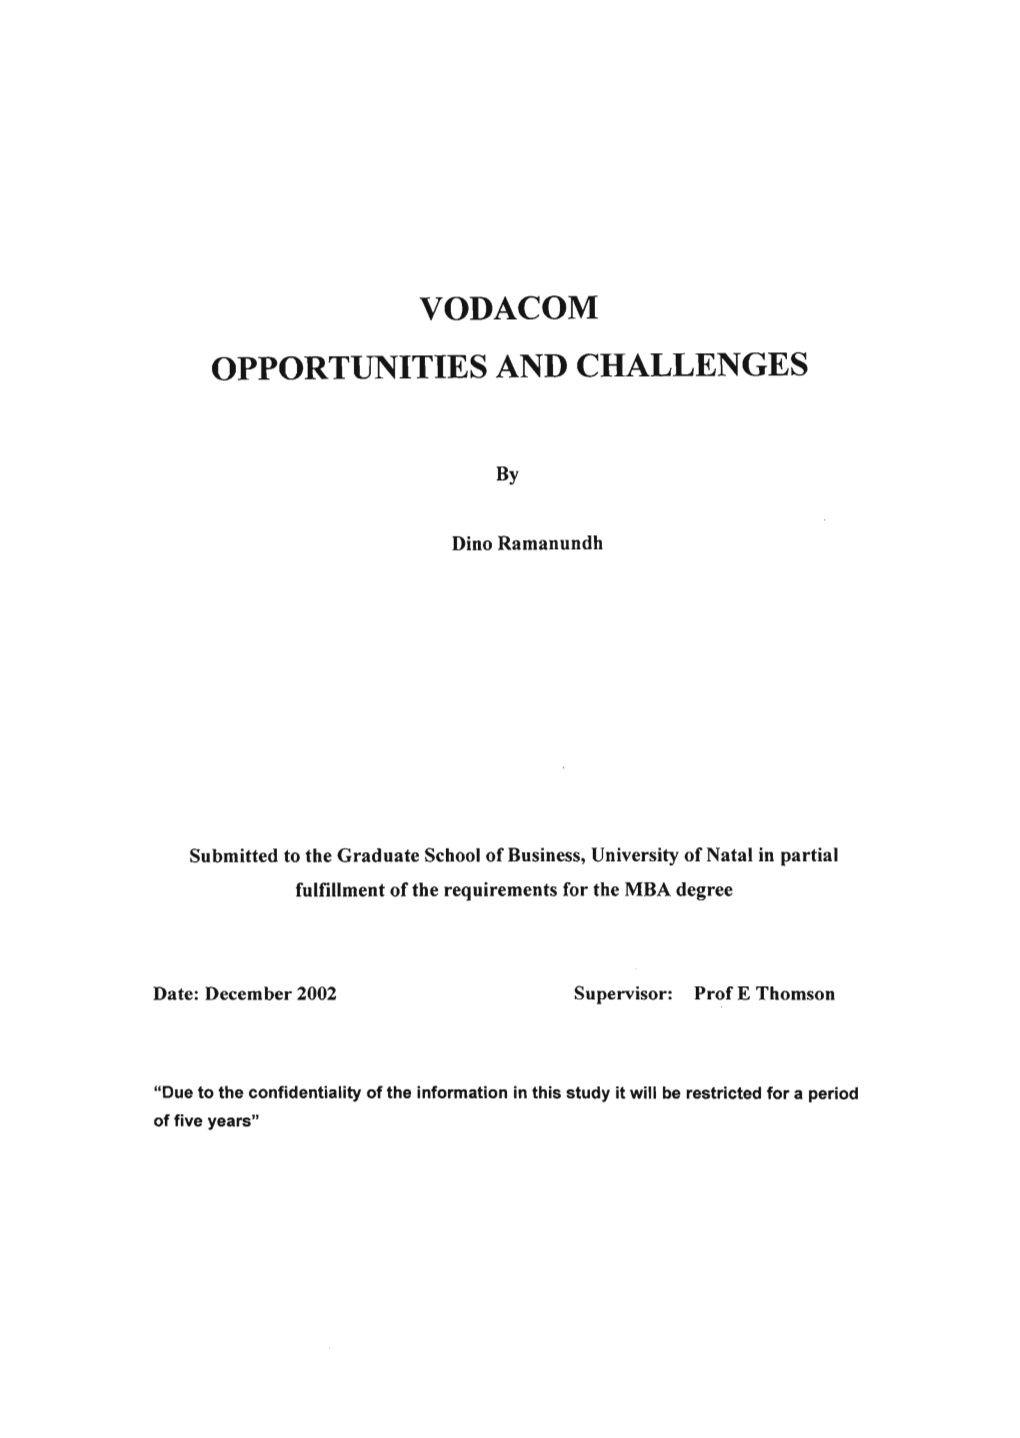 Vodacom Opportunities and Challenges